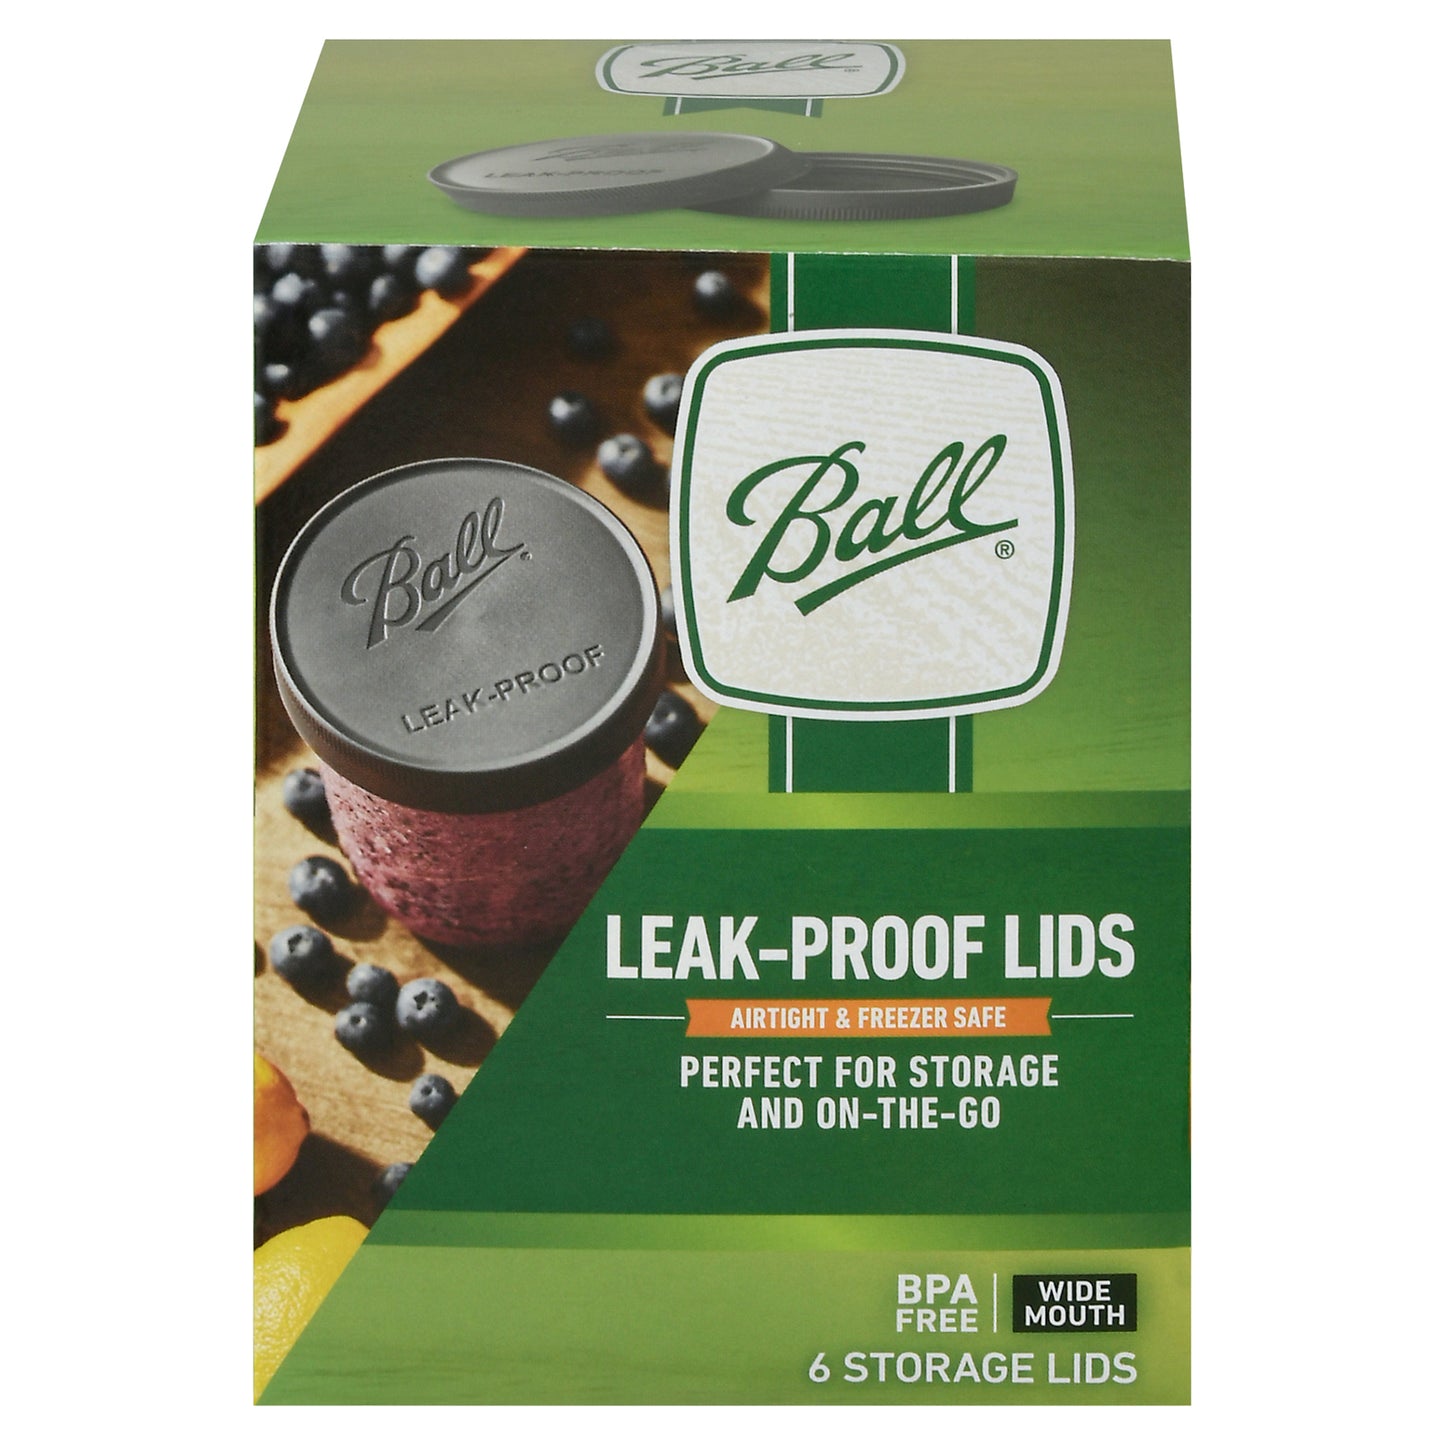 Ball Canning - Storage Lid Leak-proof Wm - Case Of 6 - 6 Count